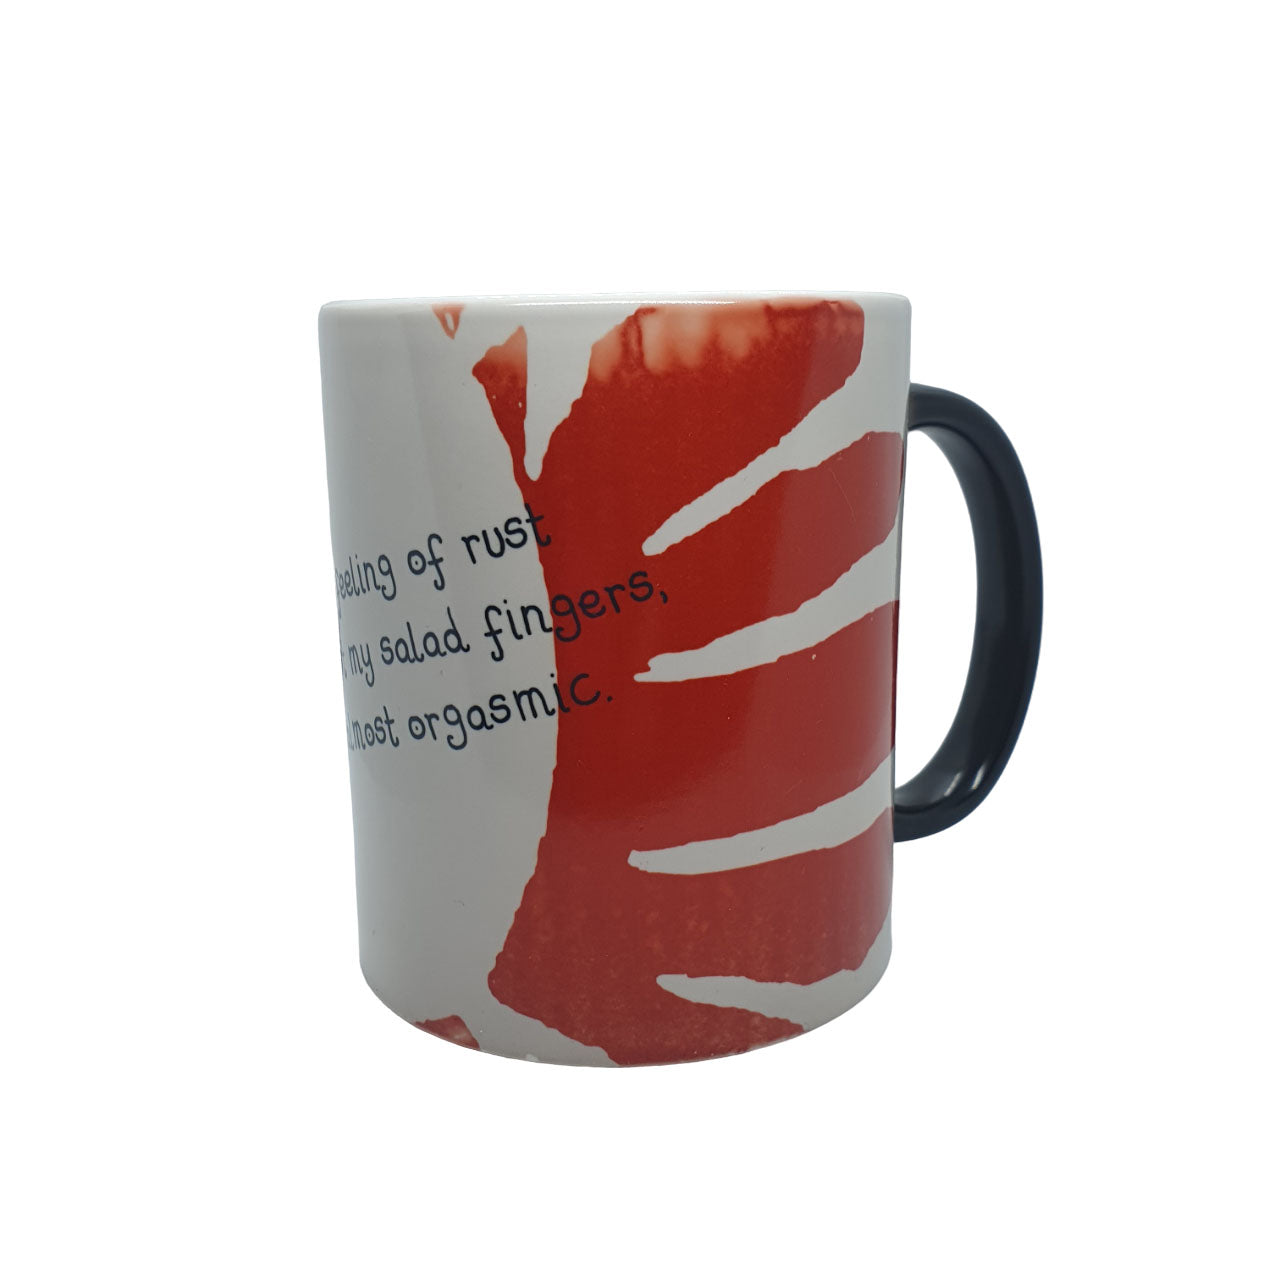 salad fingers by david firth fan art showing print quality on colour changing heat mug